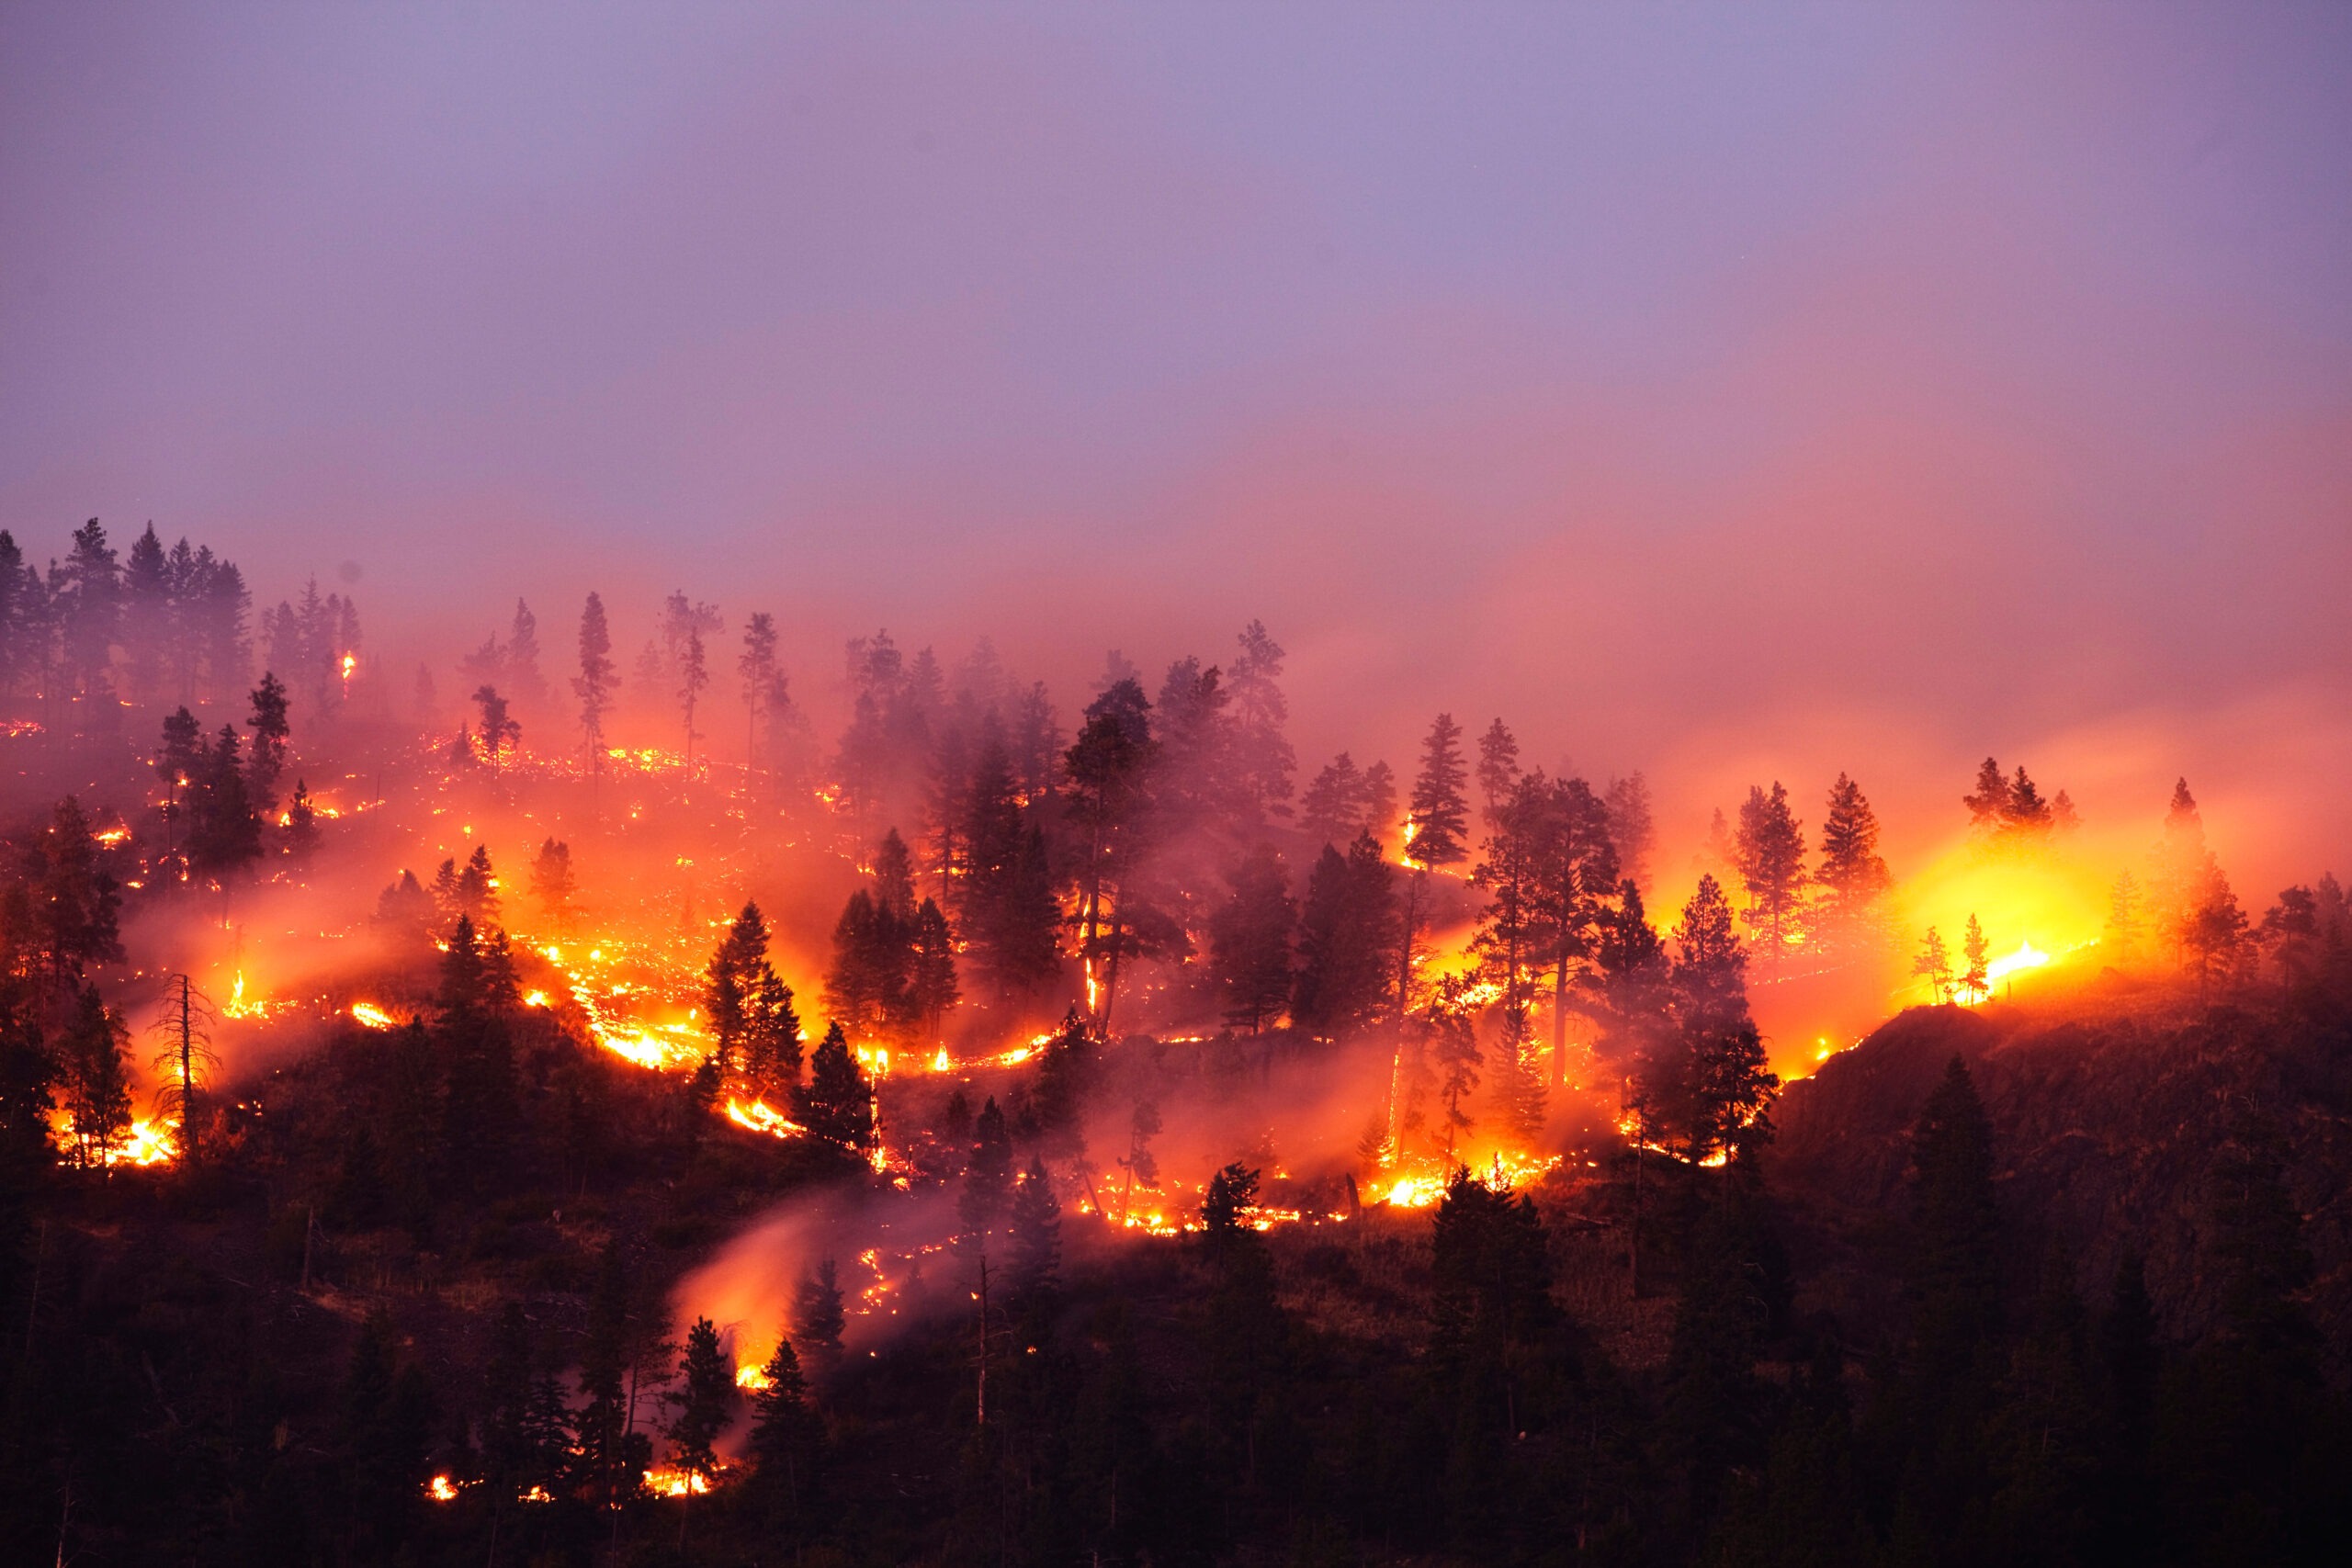 A wildfire burning at night in a forested mountain side.